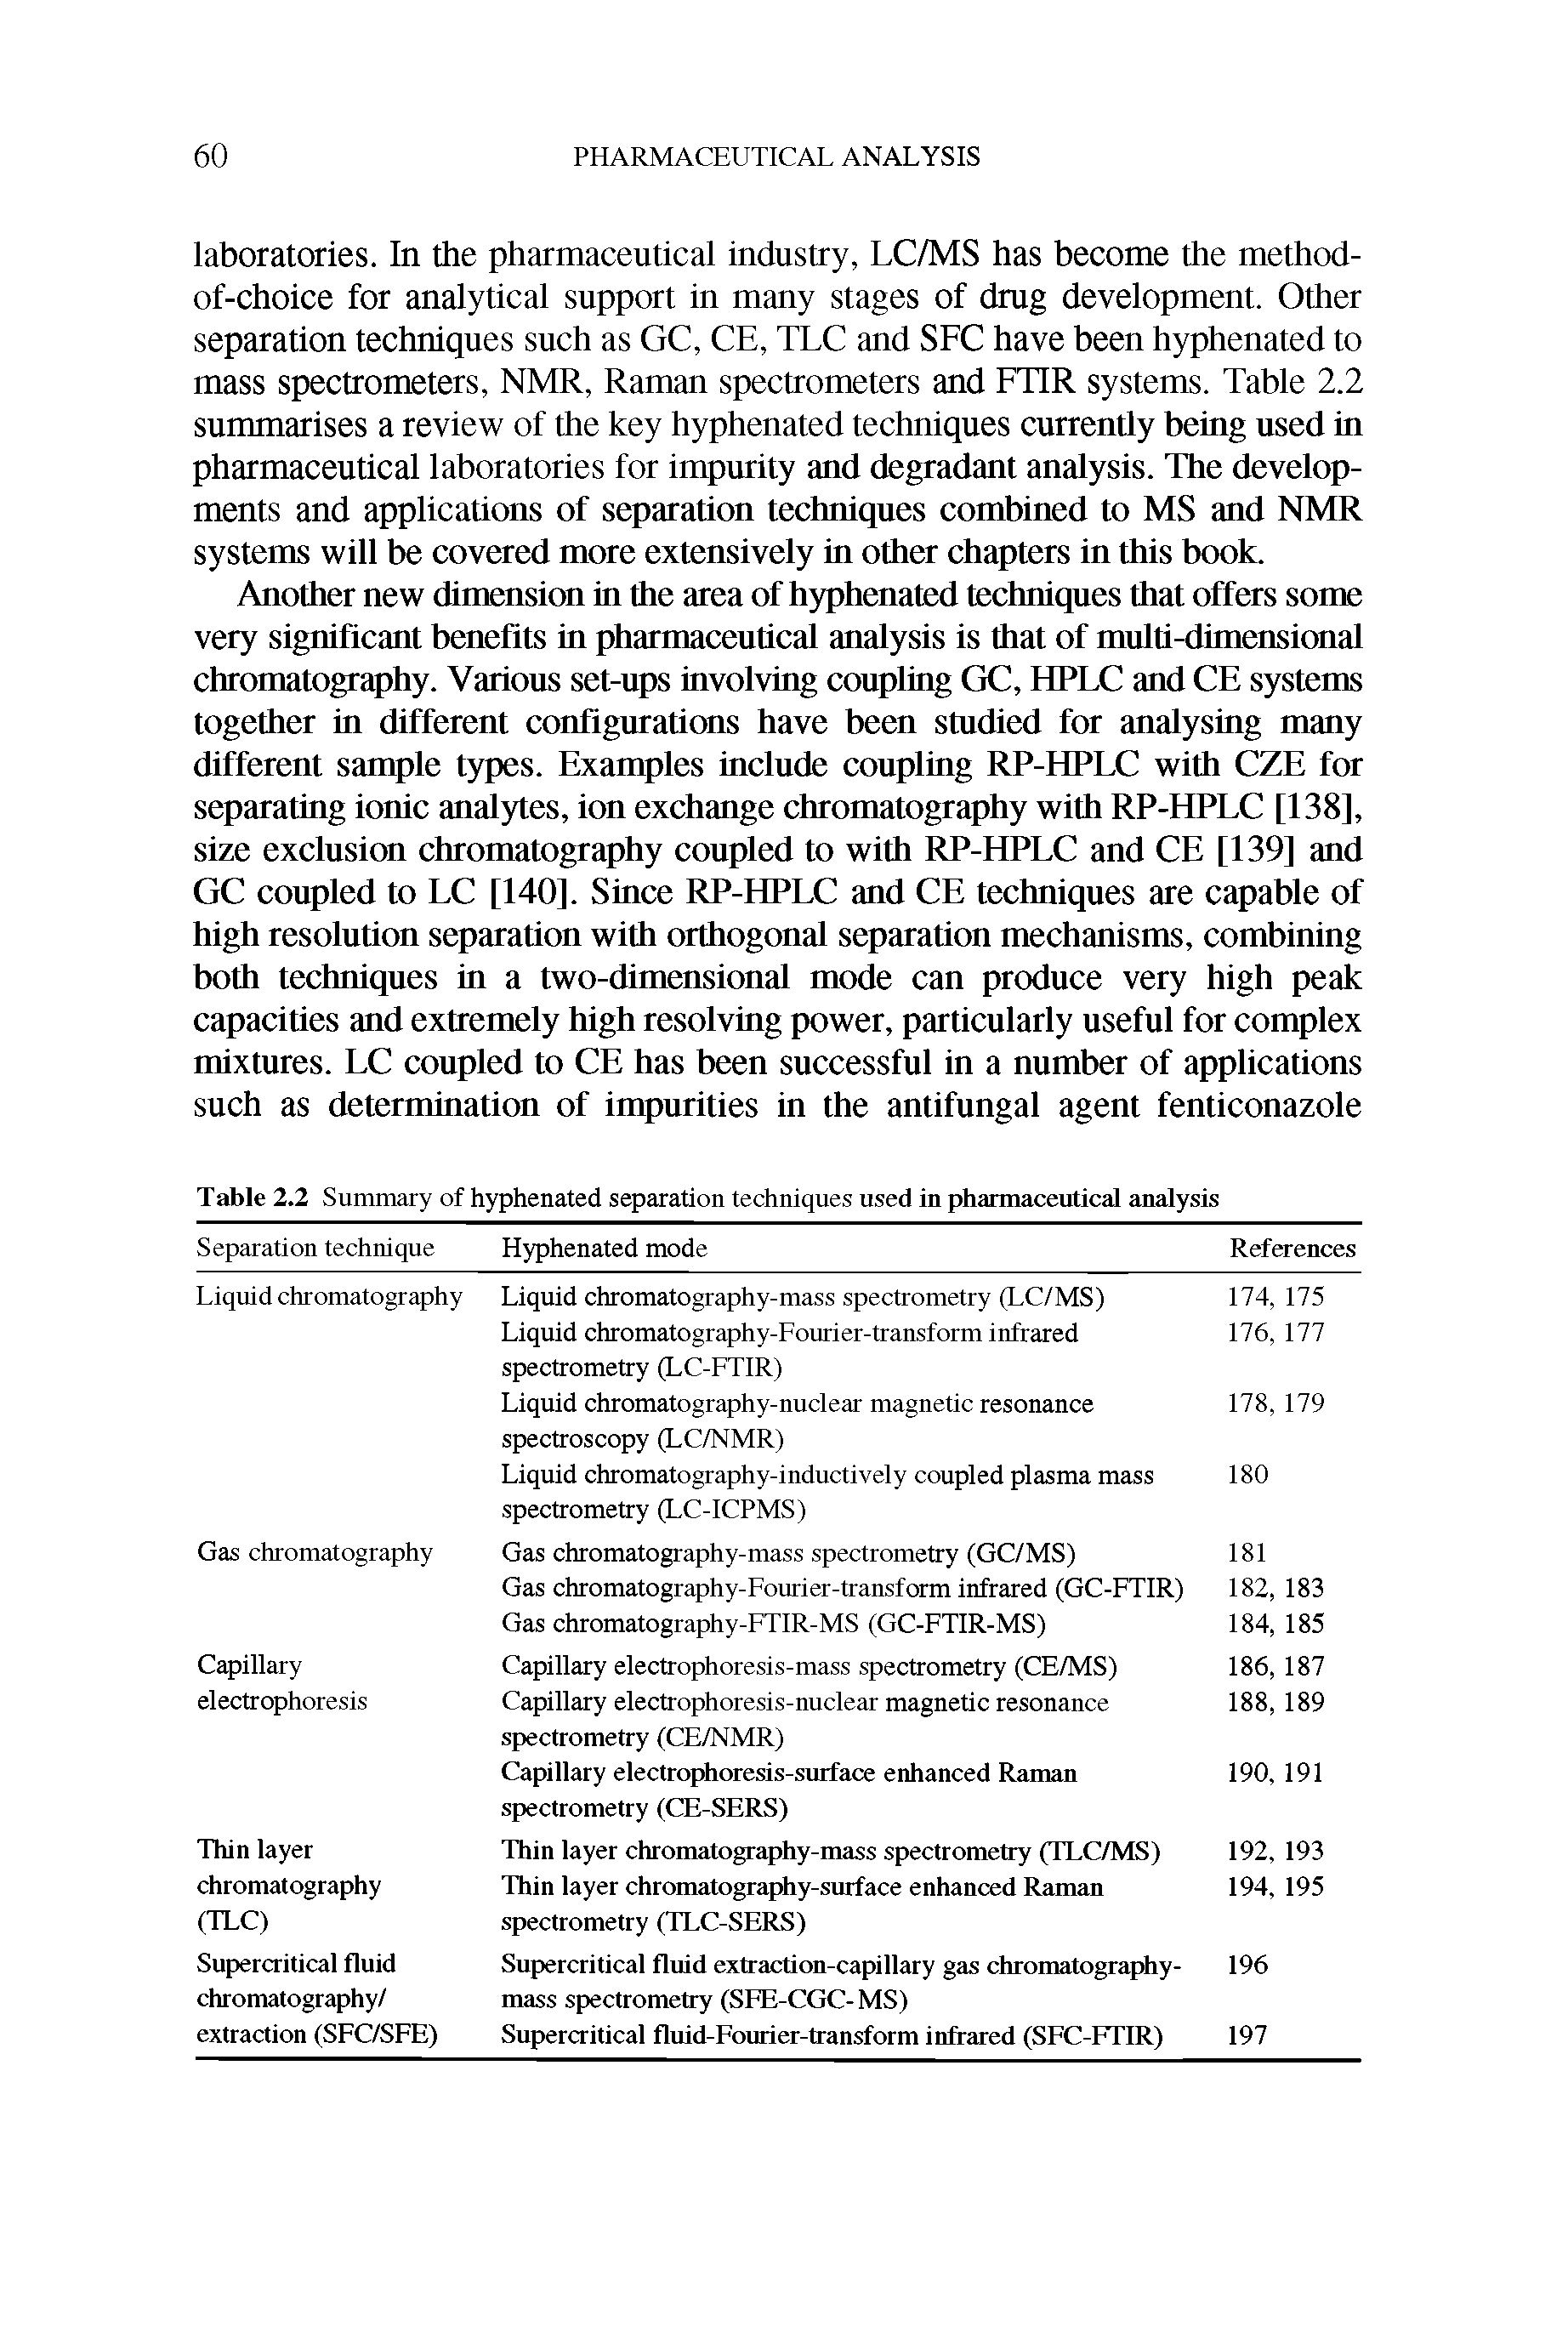 Table 2.2 Summary of hyphenated separation techniques used in pharmaceutical analysis...